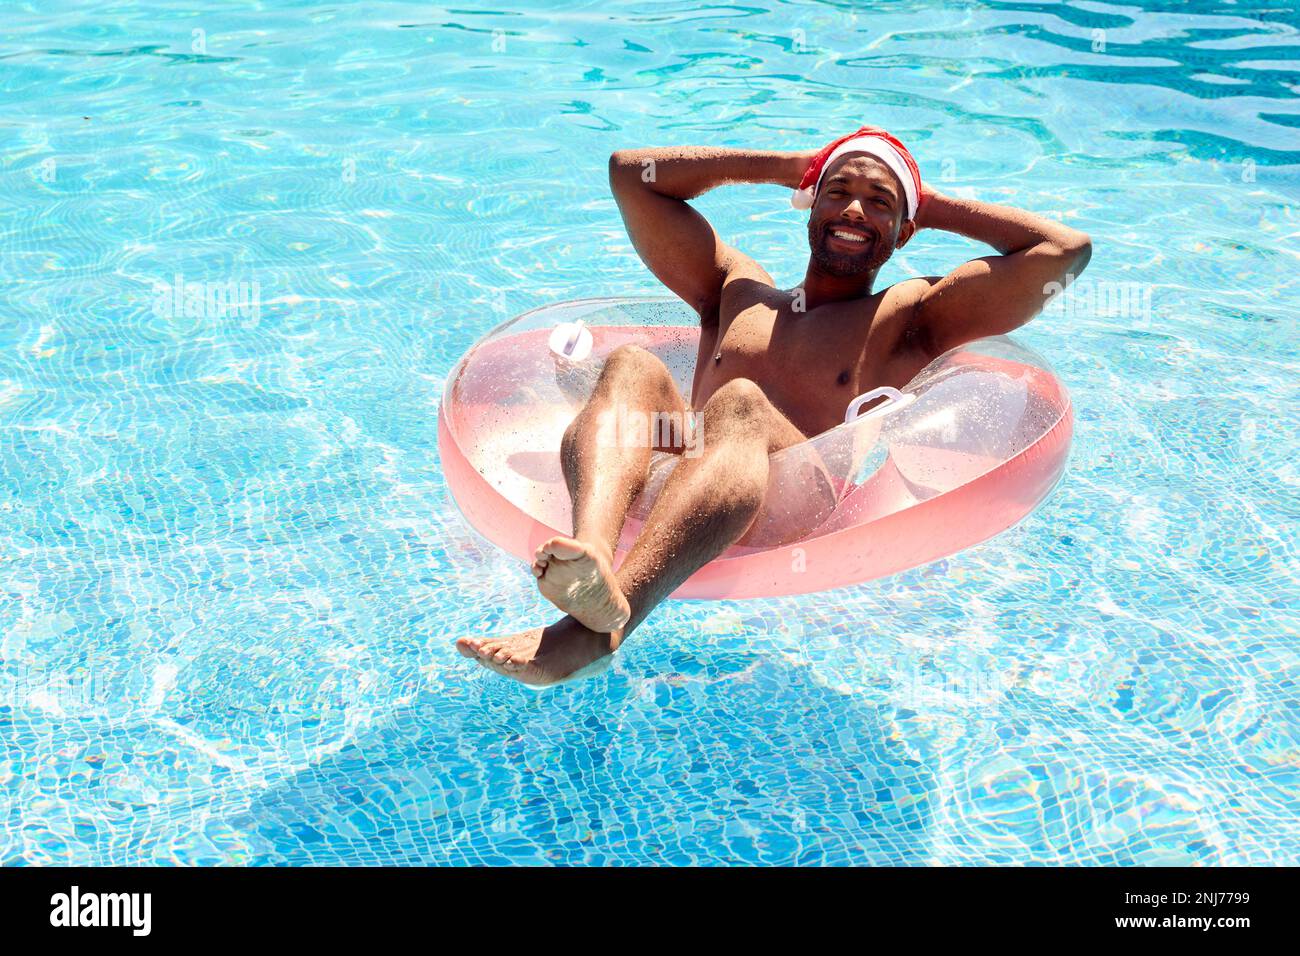 Man On Christmas Holiday Floating On Inflatable In Swimming Pool Wearing Santa Hat Stock Photo